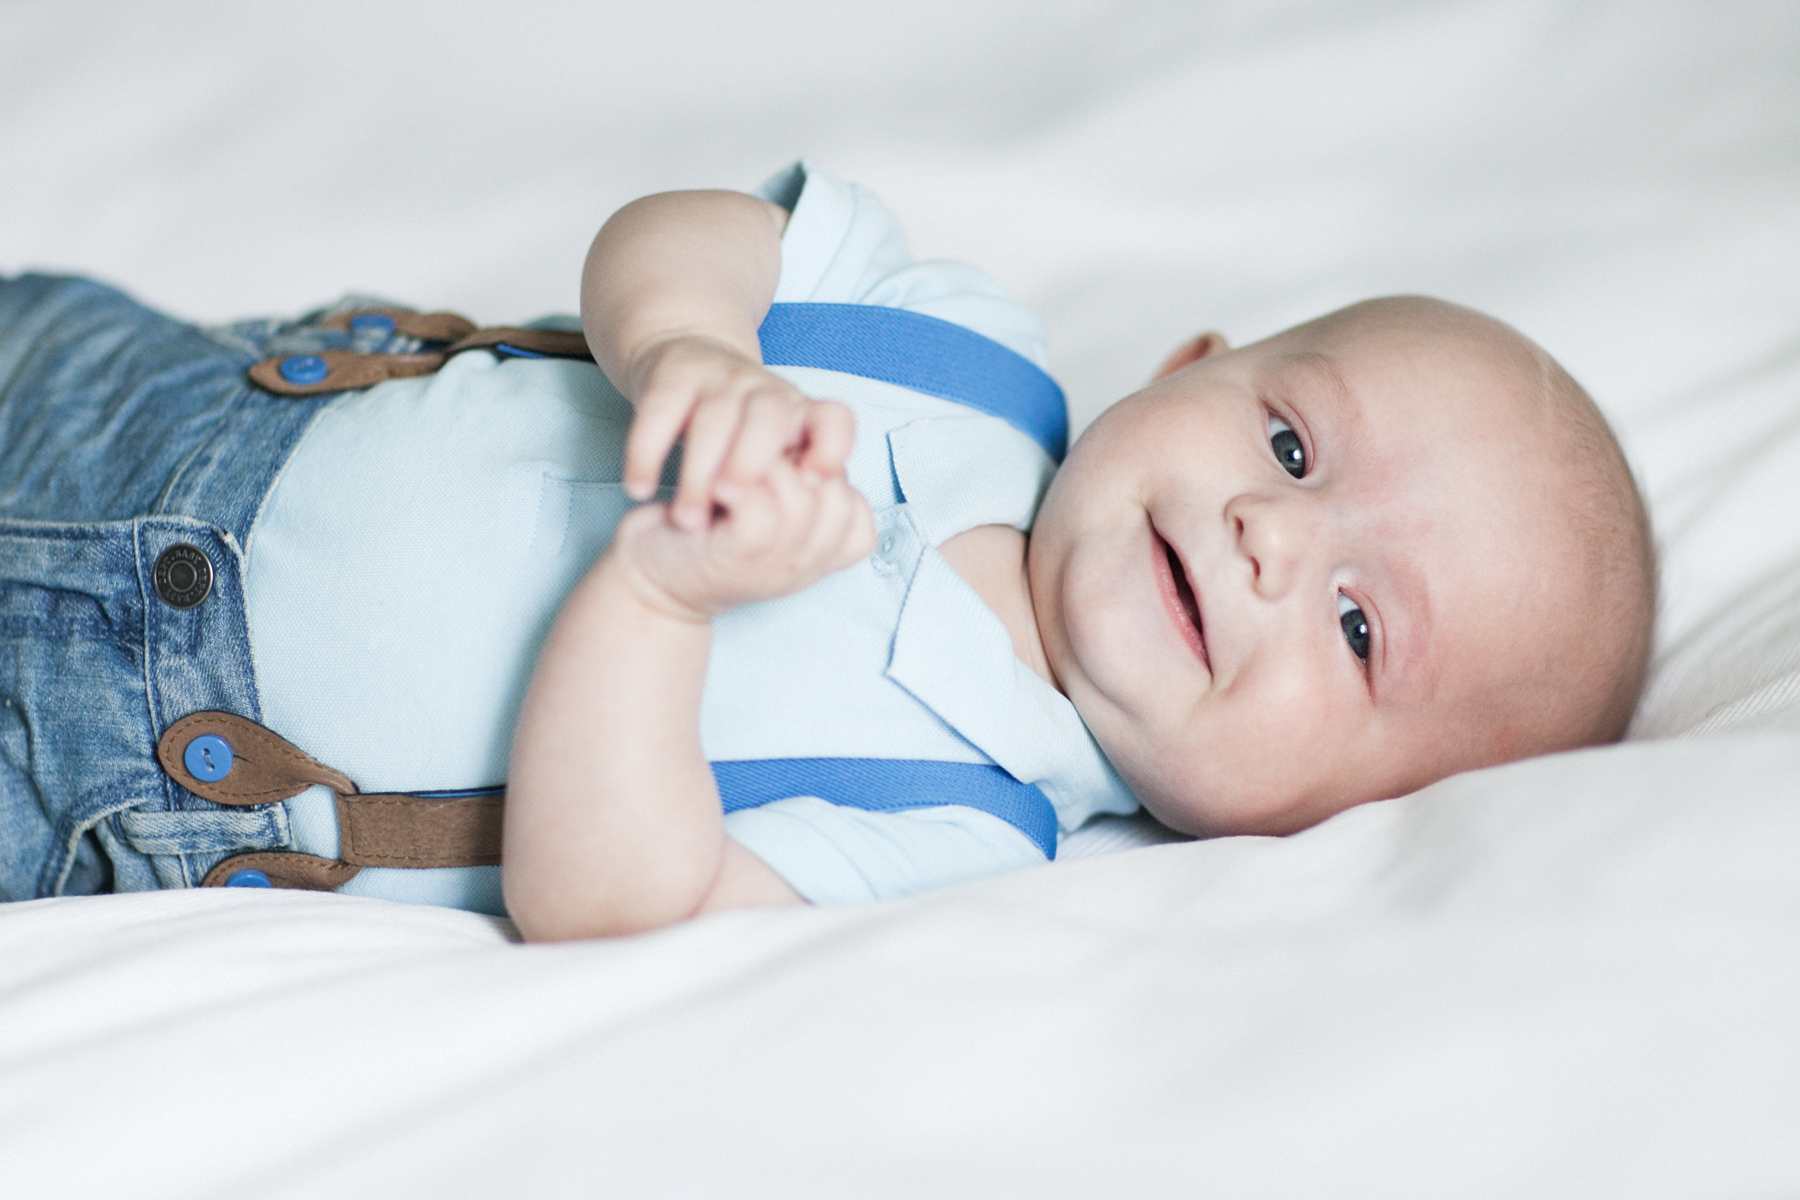 Lifestyle baby photography by Irina Nilsson Photography